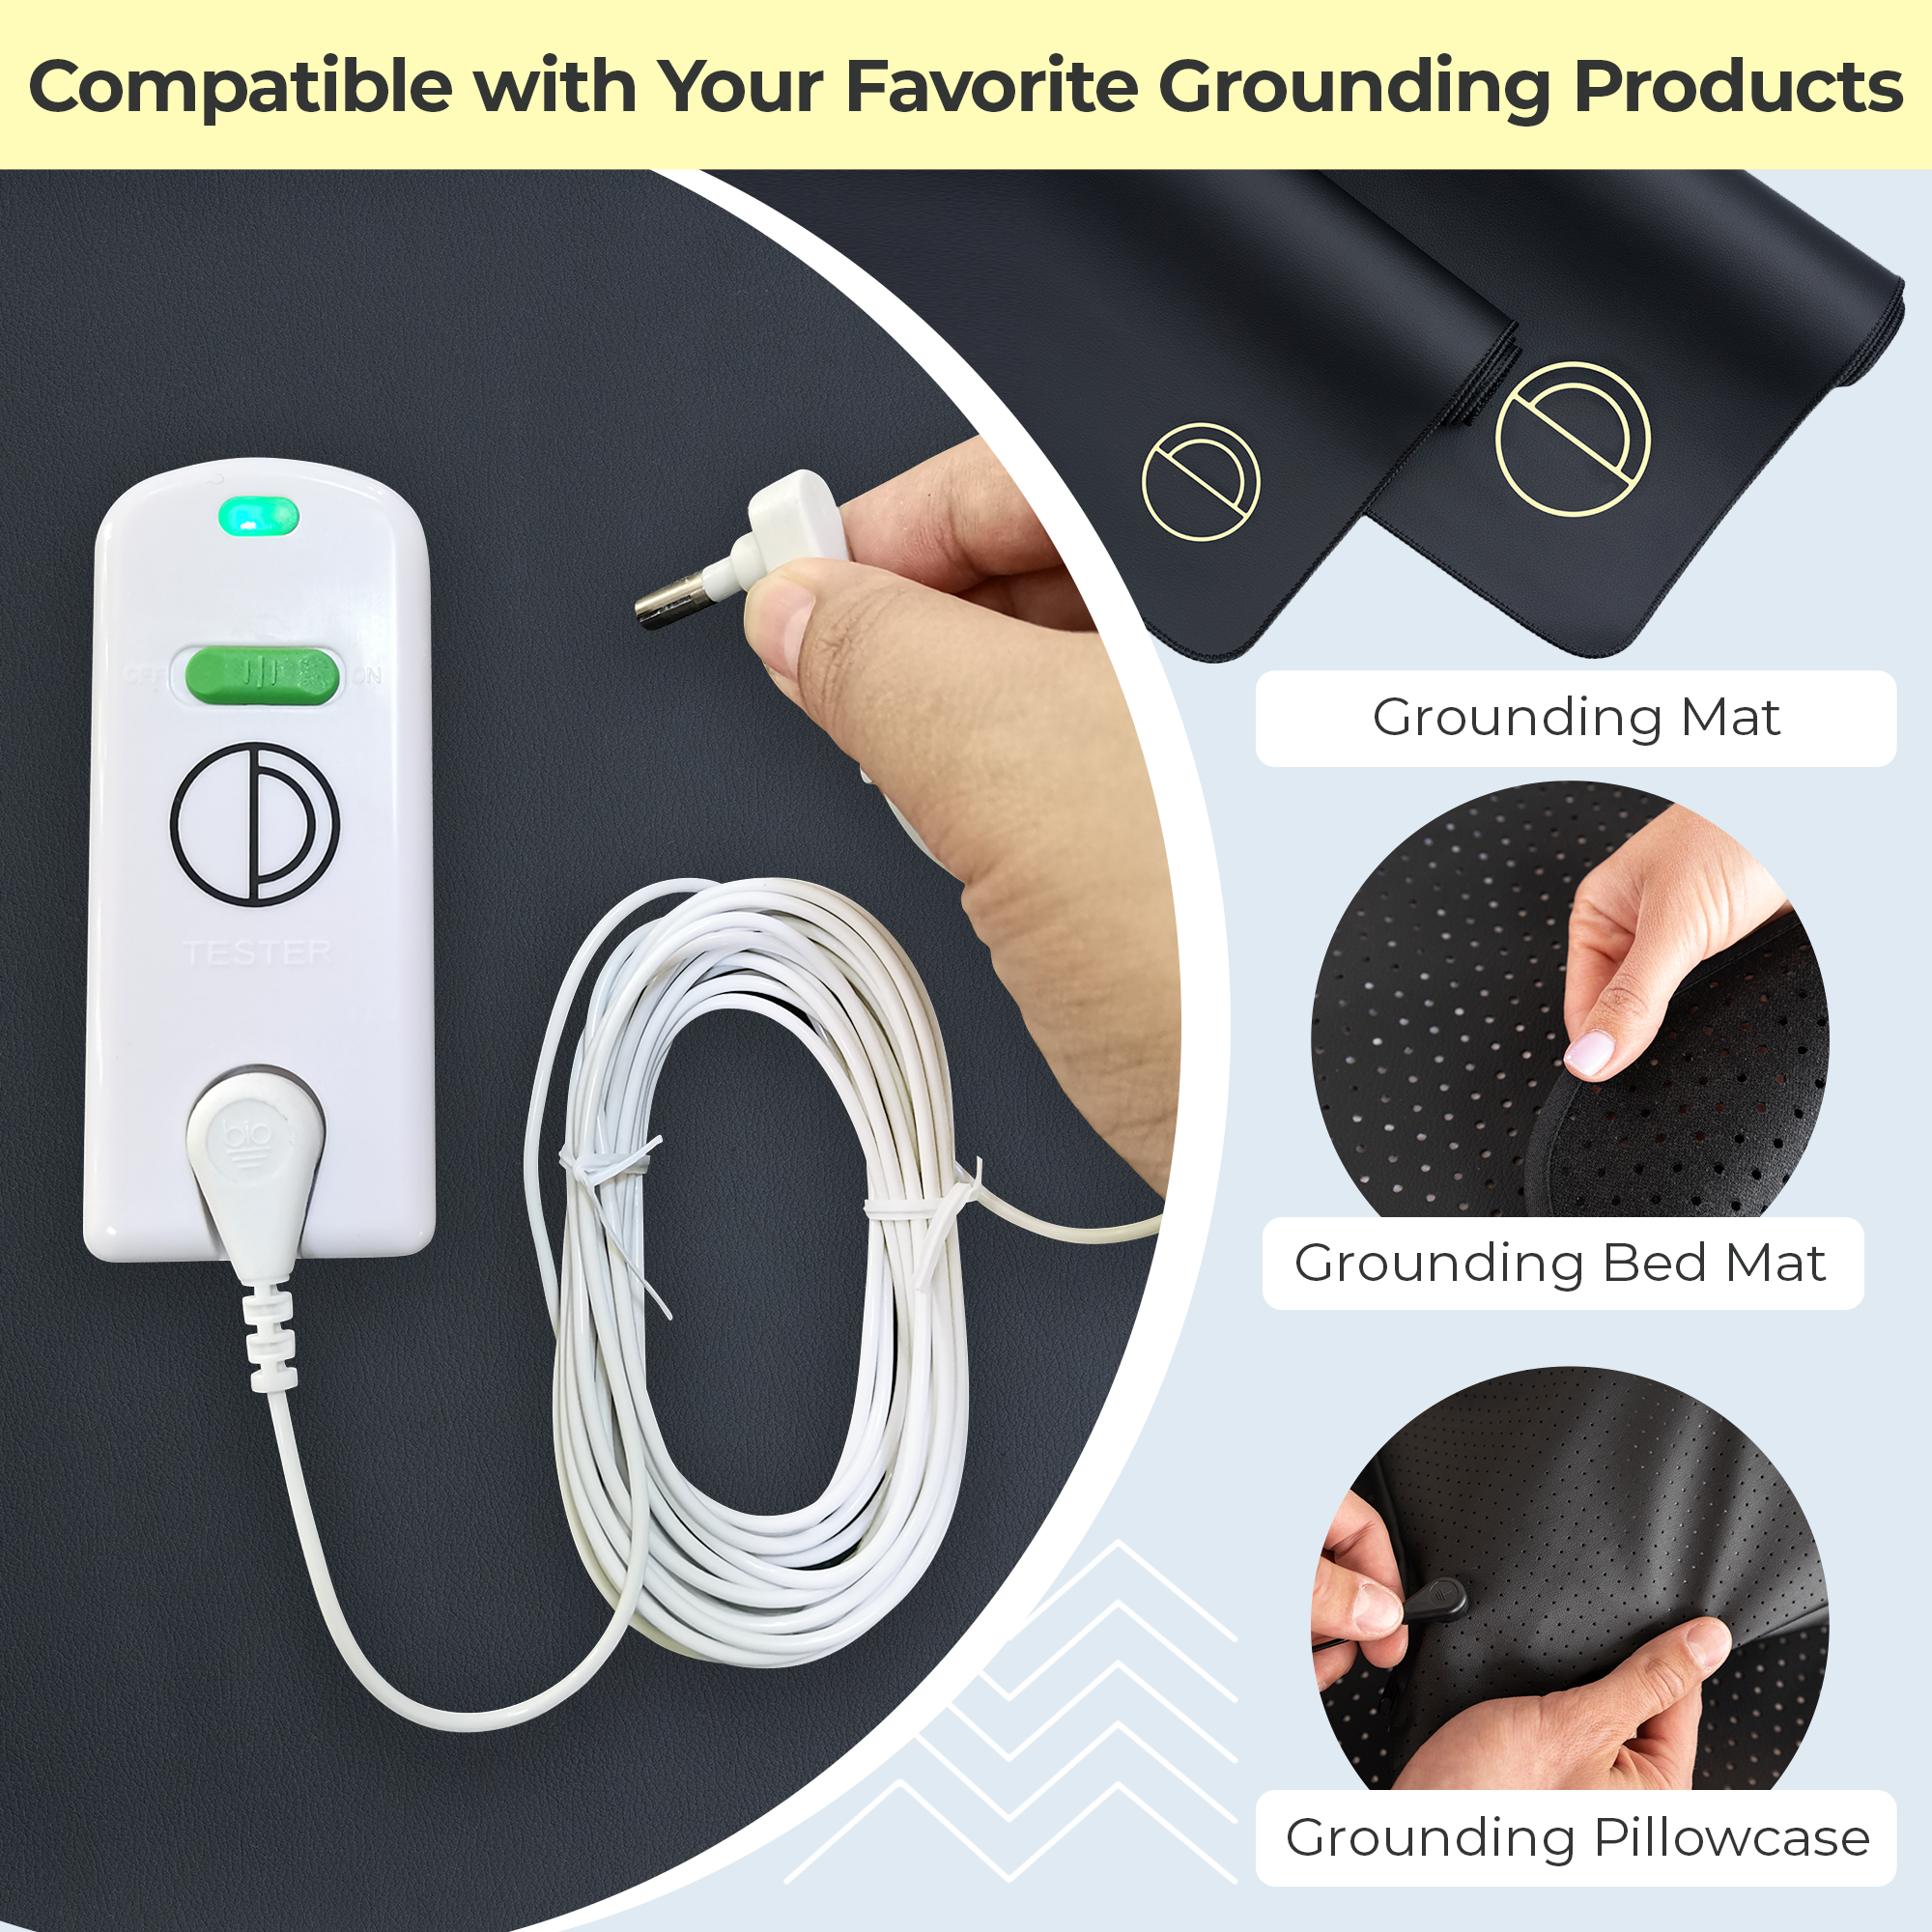 Earthing continuity tester is compatible with your favorite grounding products, grounding mat, grounding bed mat and grounding pillowcase